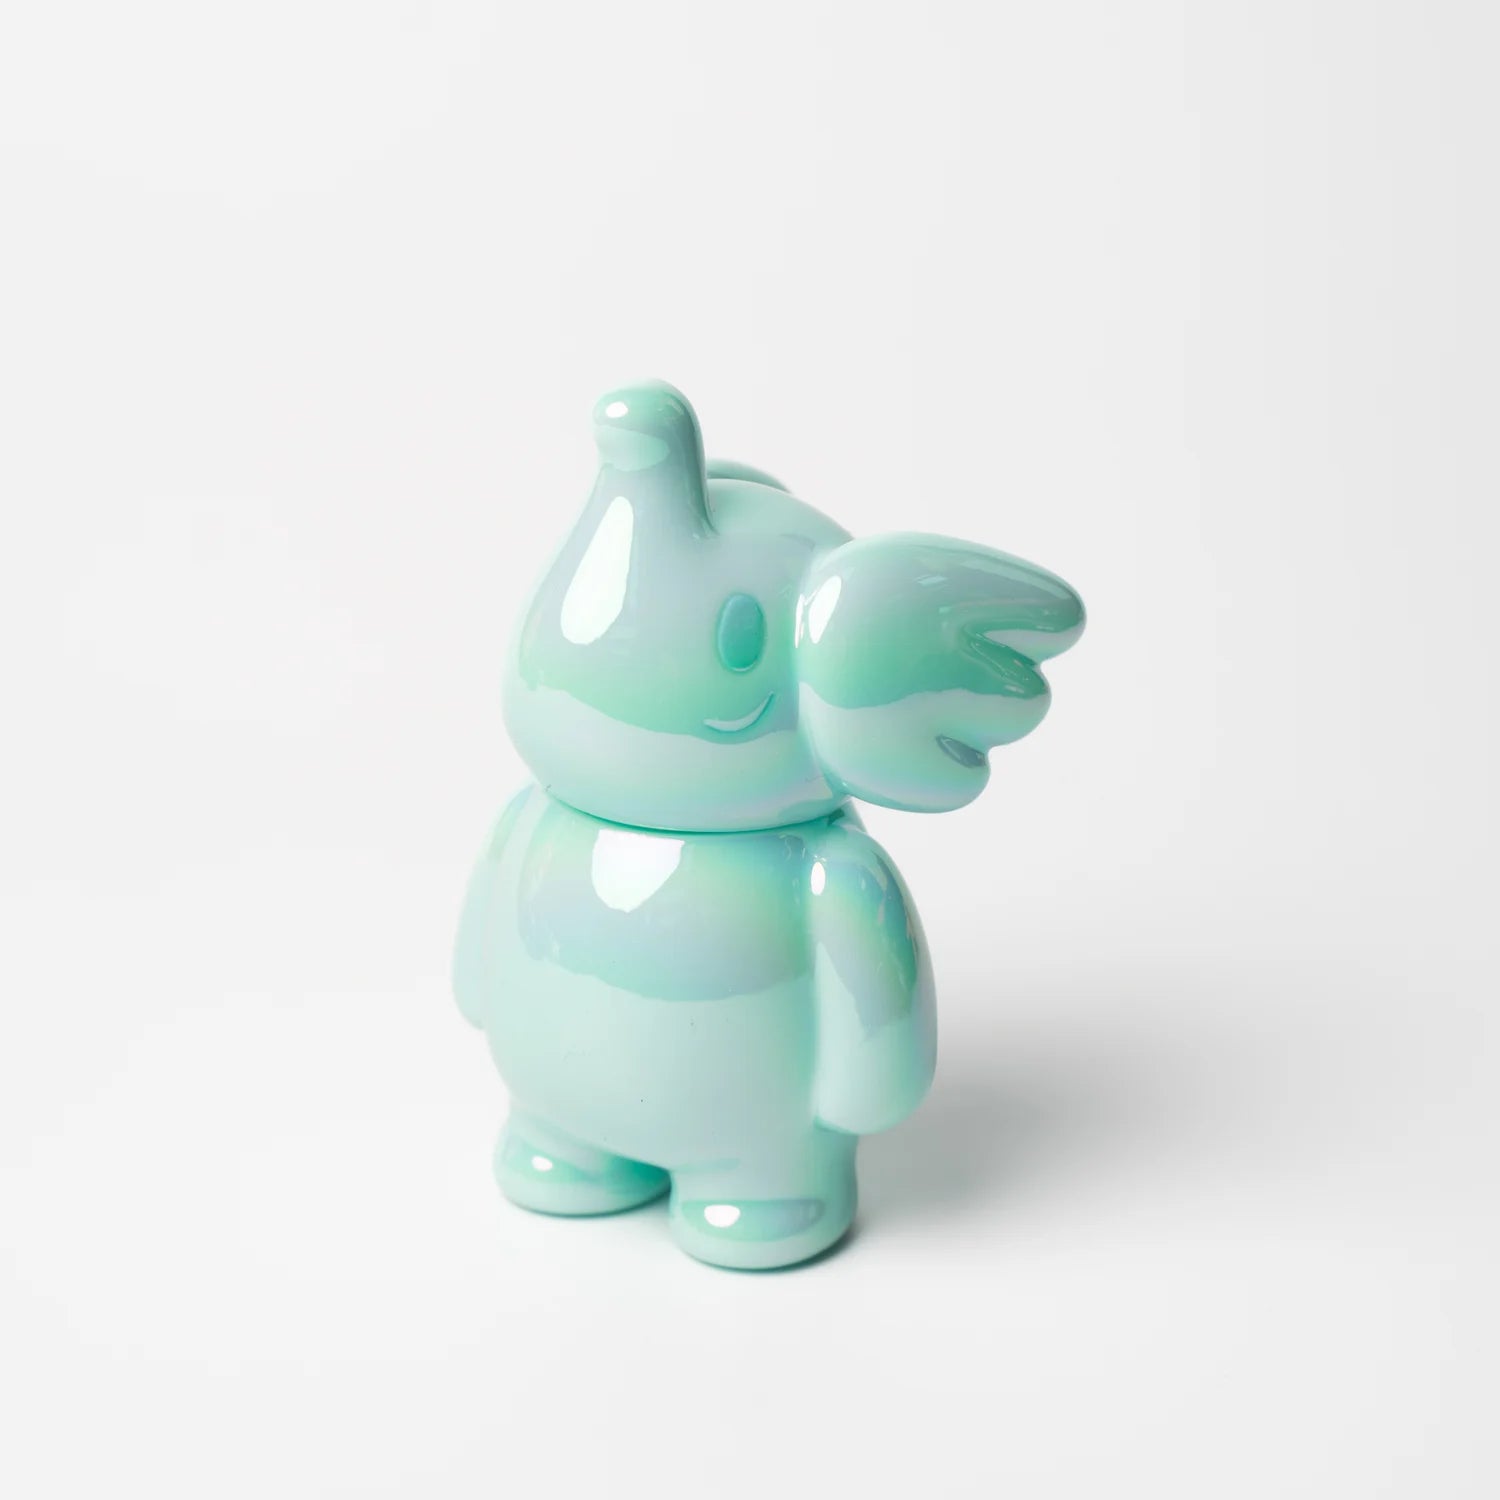 Alt text: ELFIE HERE I AM! 100% TIFFANY BLUE EDITION by Too Natthapong, a 3-inch soft vinyl toy elephant figurine.